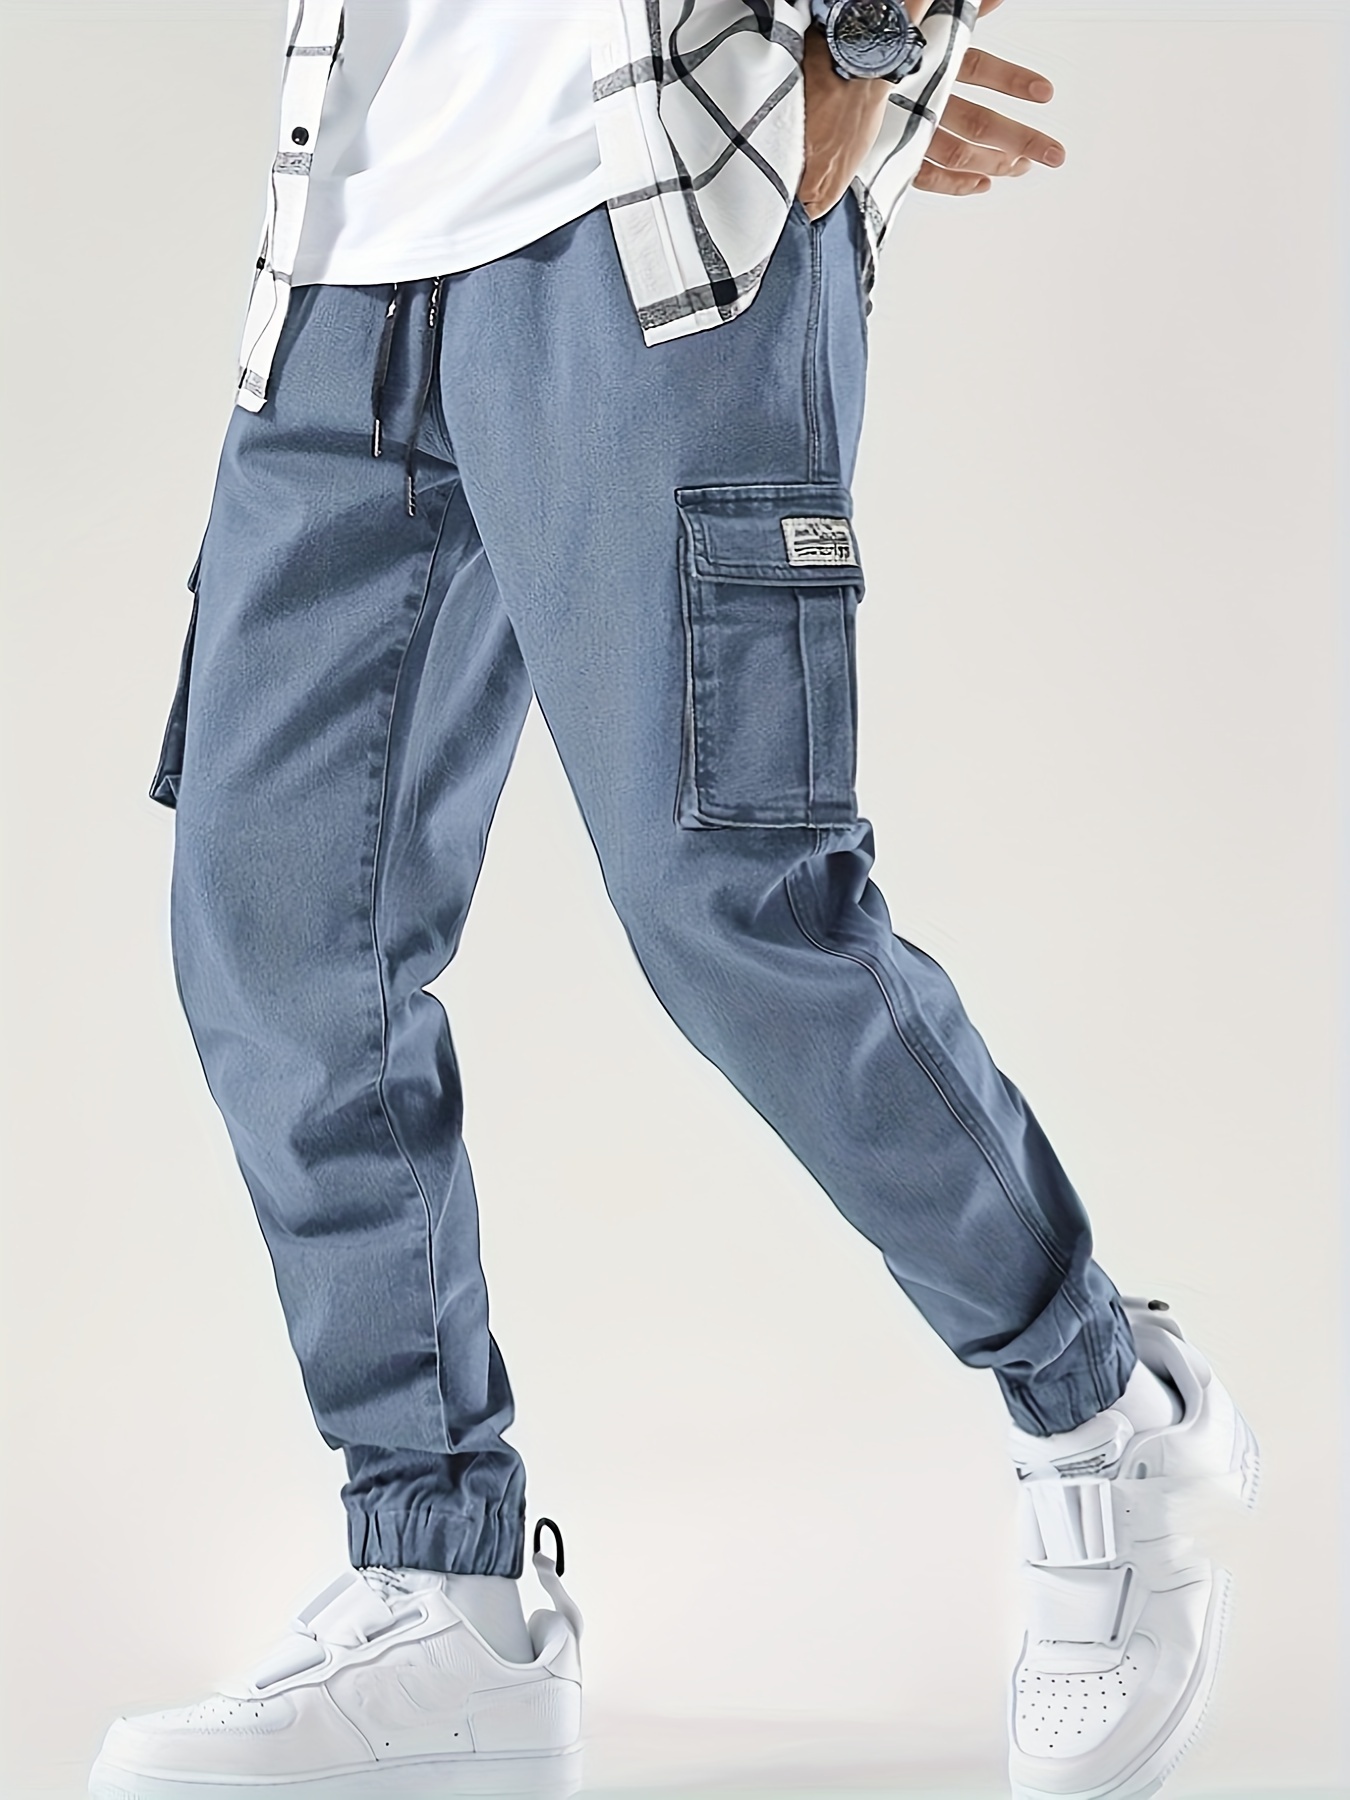 mens casual regular drawstring cargo jeans with pocket mens outfits